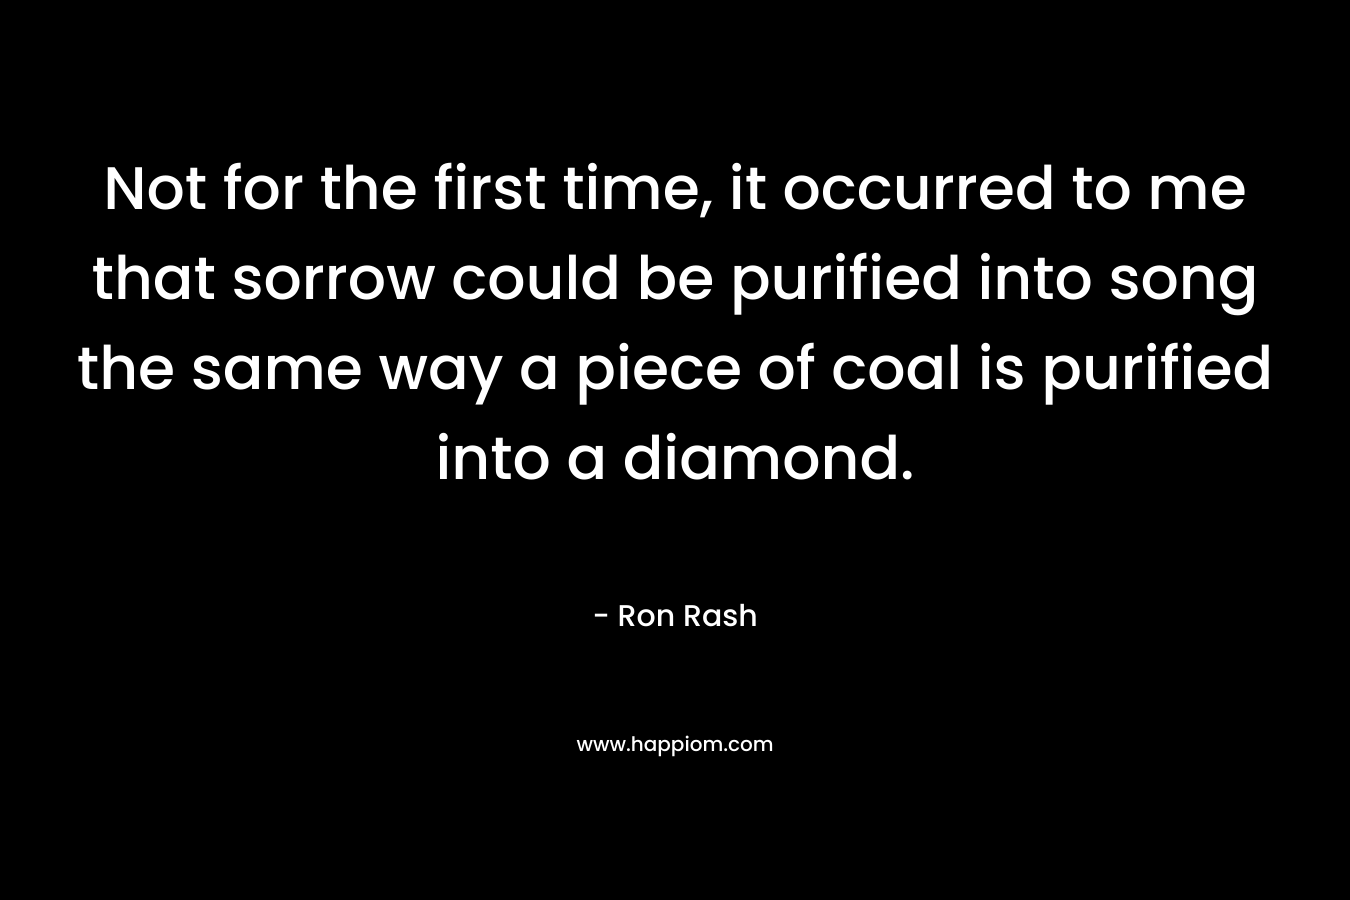 Not for the first time, it occurred to me that sorrow could be purified into song the same way a piece of coal is purified into a diamond. – Ron Rash